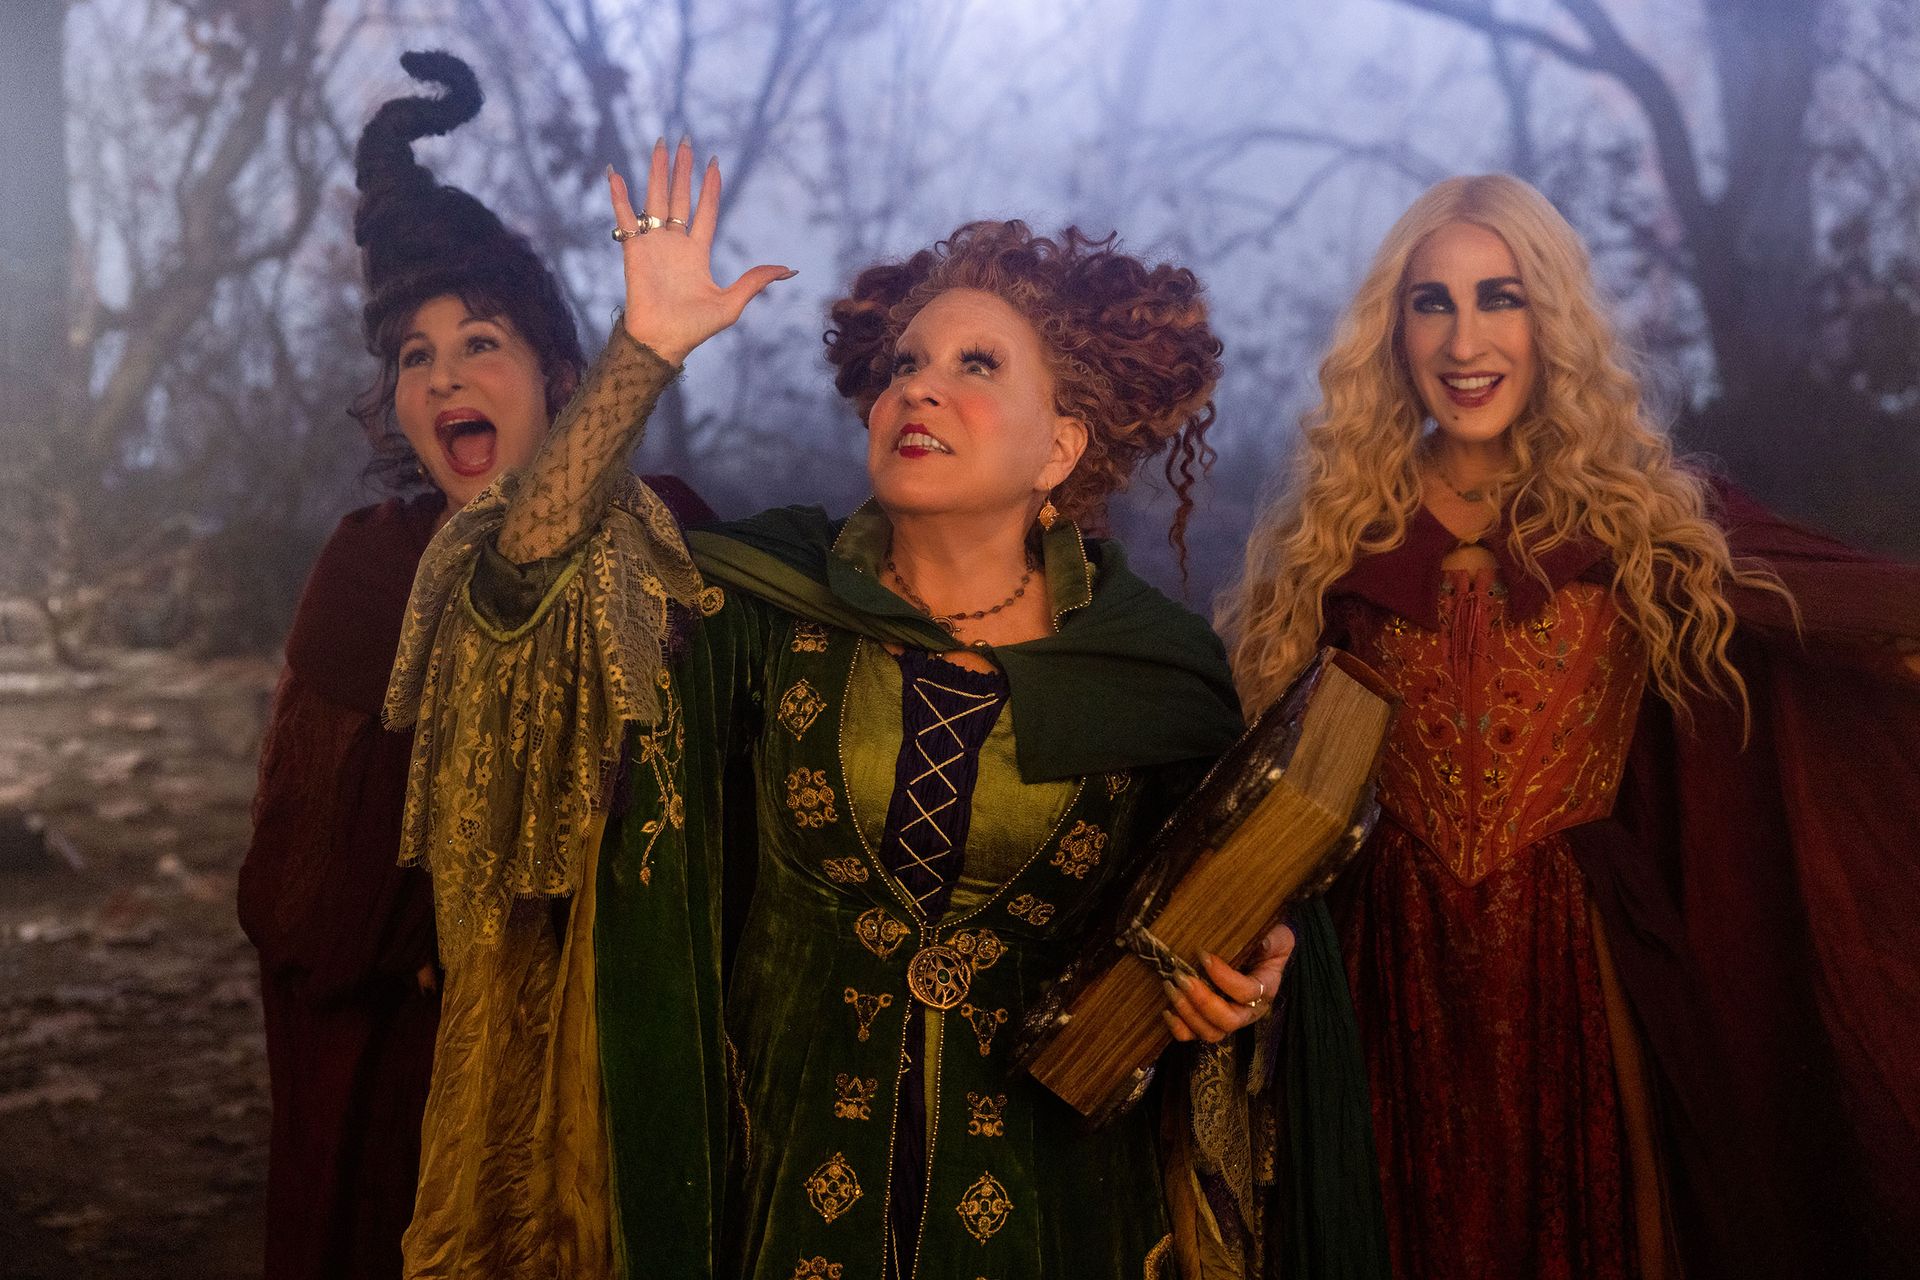 In this article, we are going to cover the Disney Plus Hocus Pocus 2 trailer, release date, and cast, so you know all there is to it about the upcoming movie.